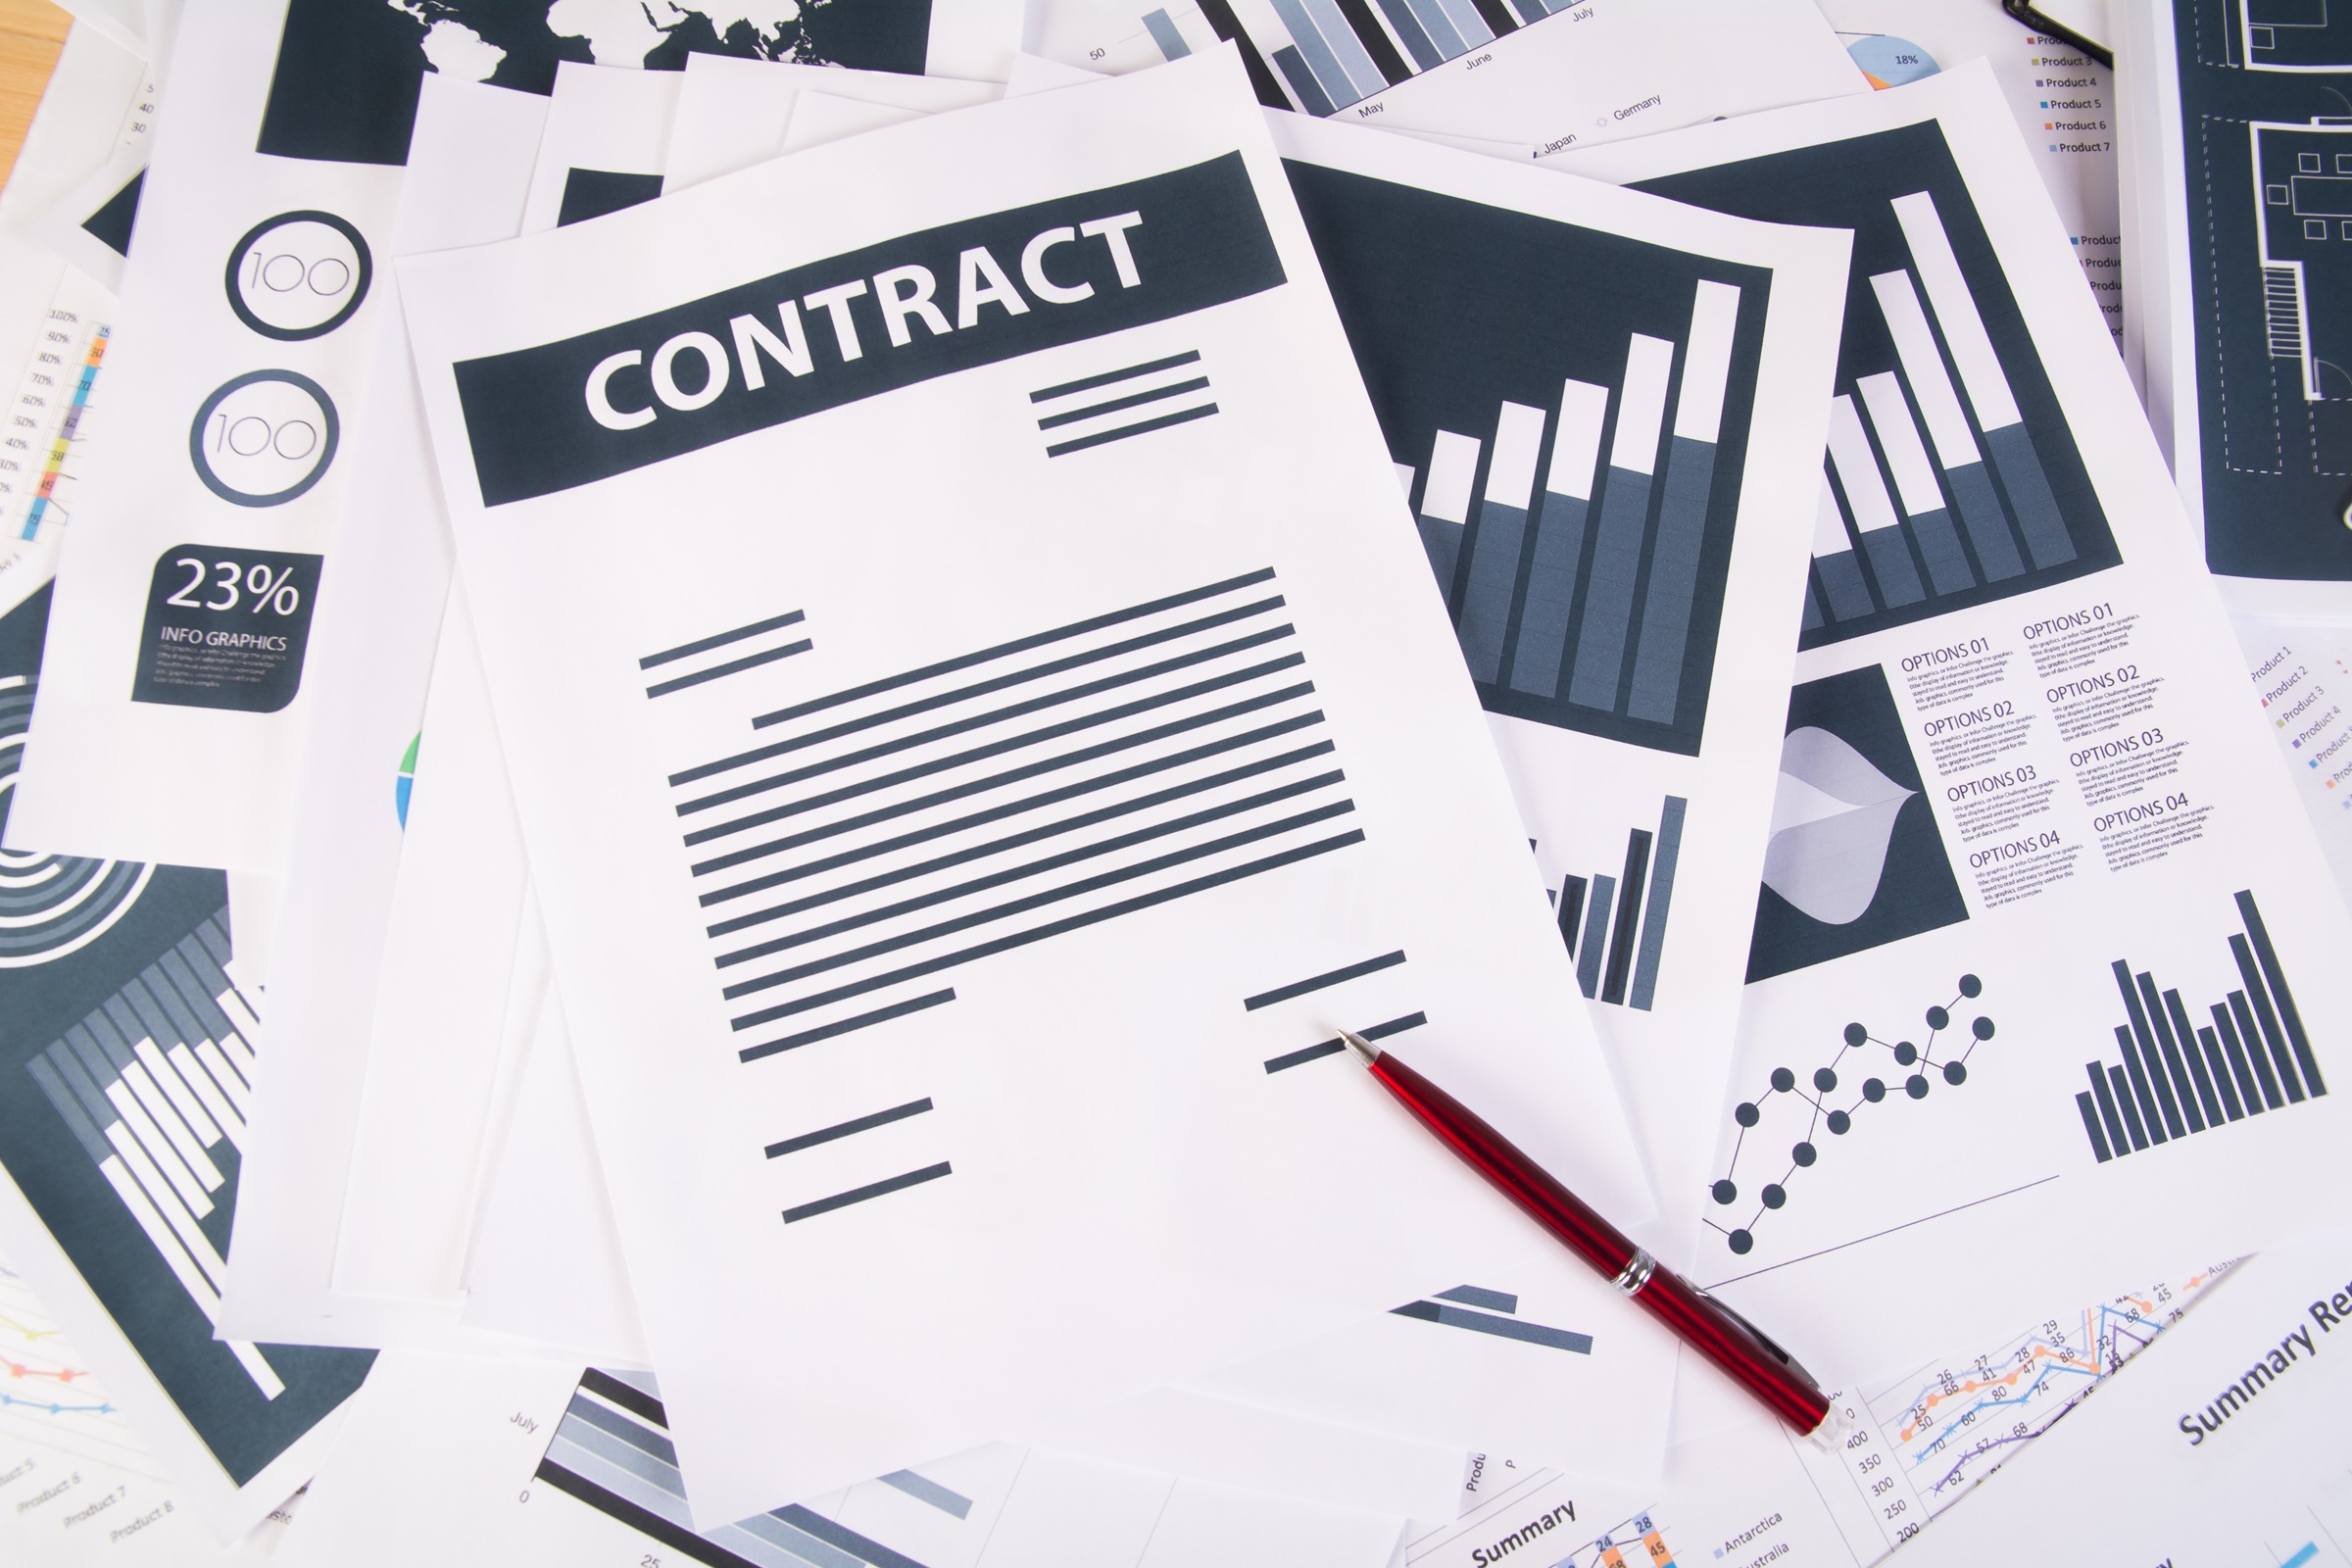 The Ultimate Guide to Landing High-Value Consultancy Contracts